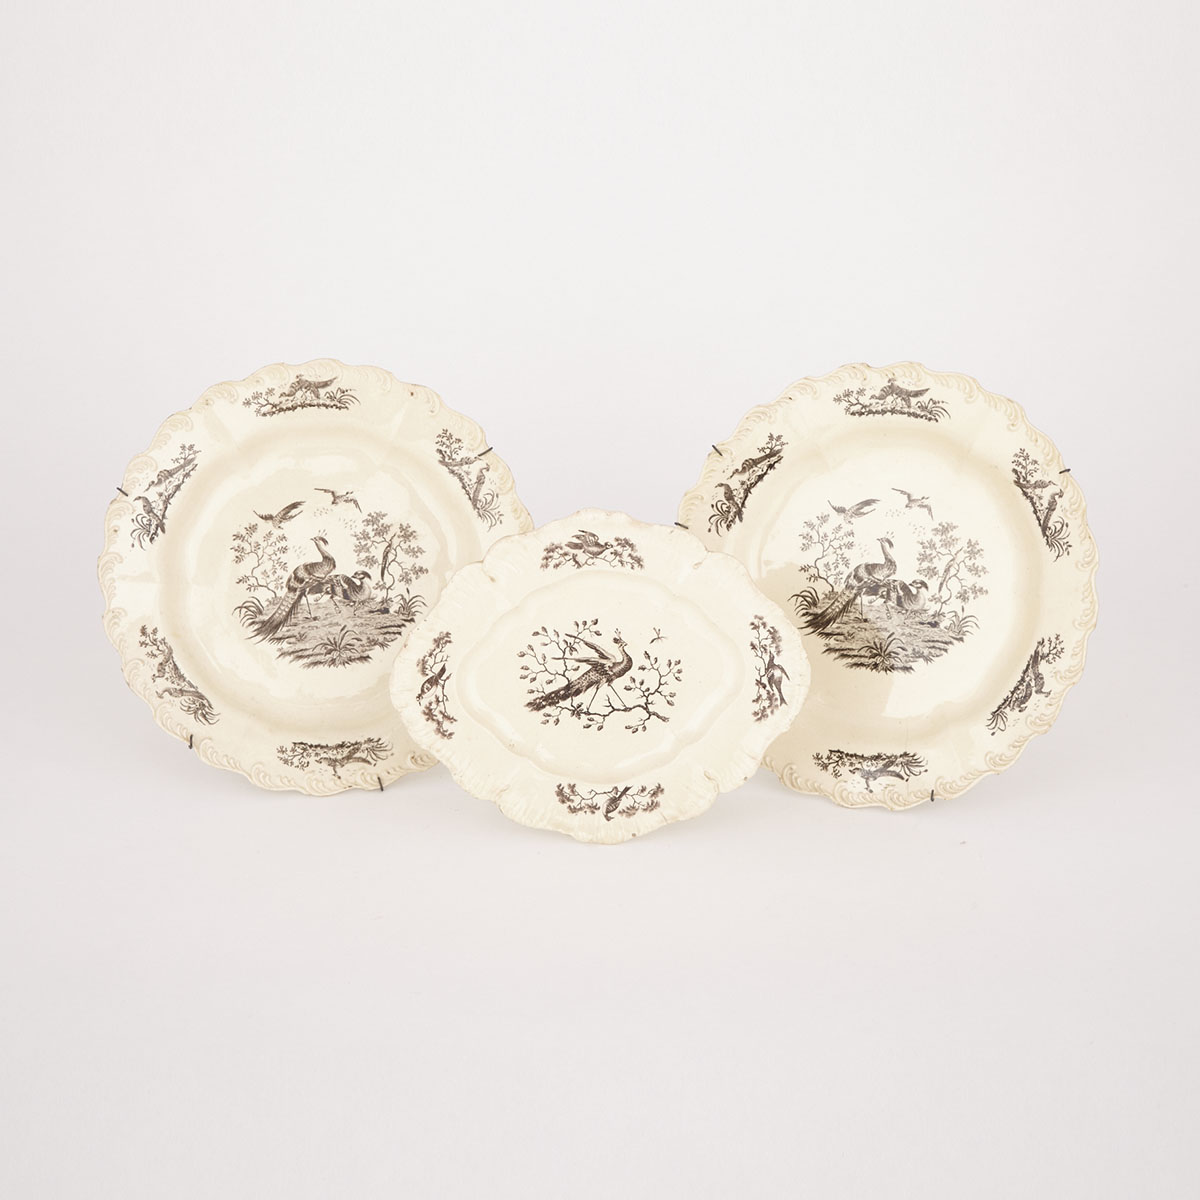 Two English Creamware ‘Liverpool Birds’ Plates and an Oval Dish, late 18th century